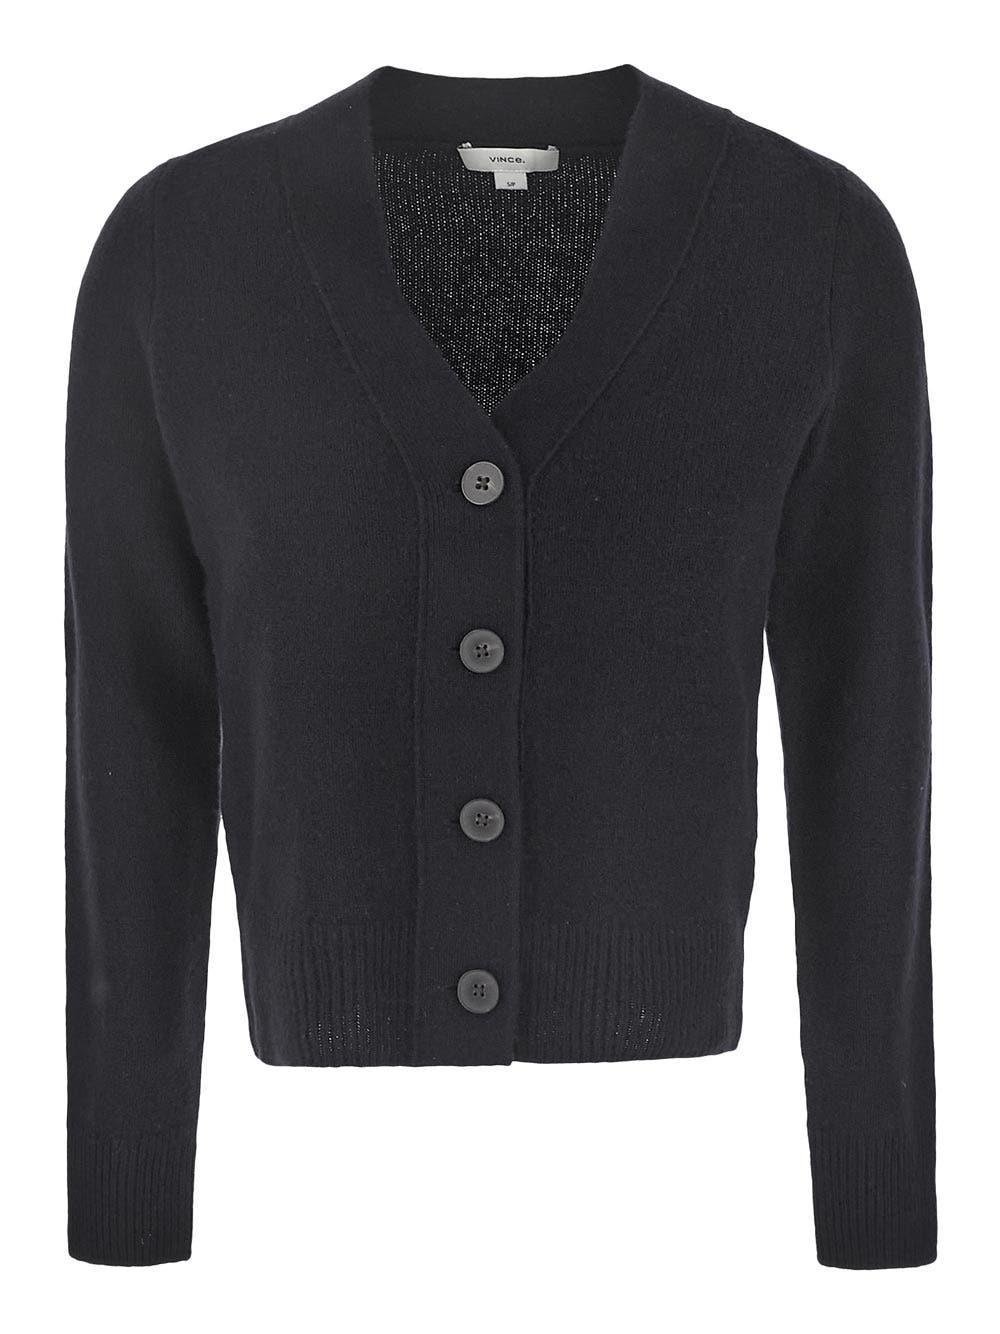 Vince Cropped Cardigan